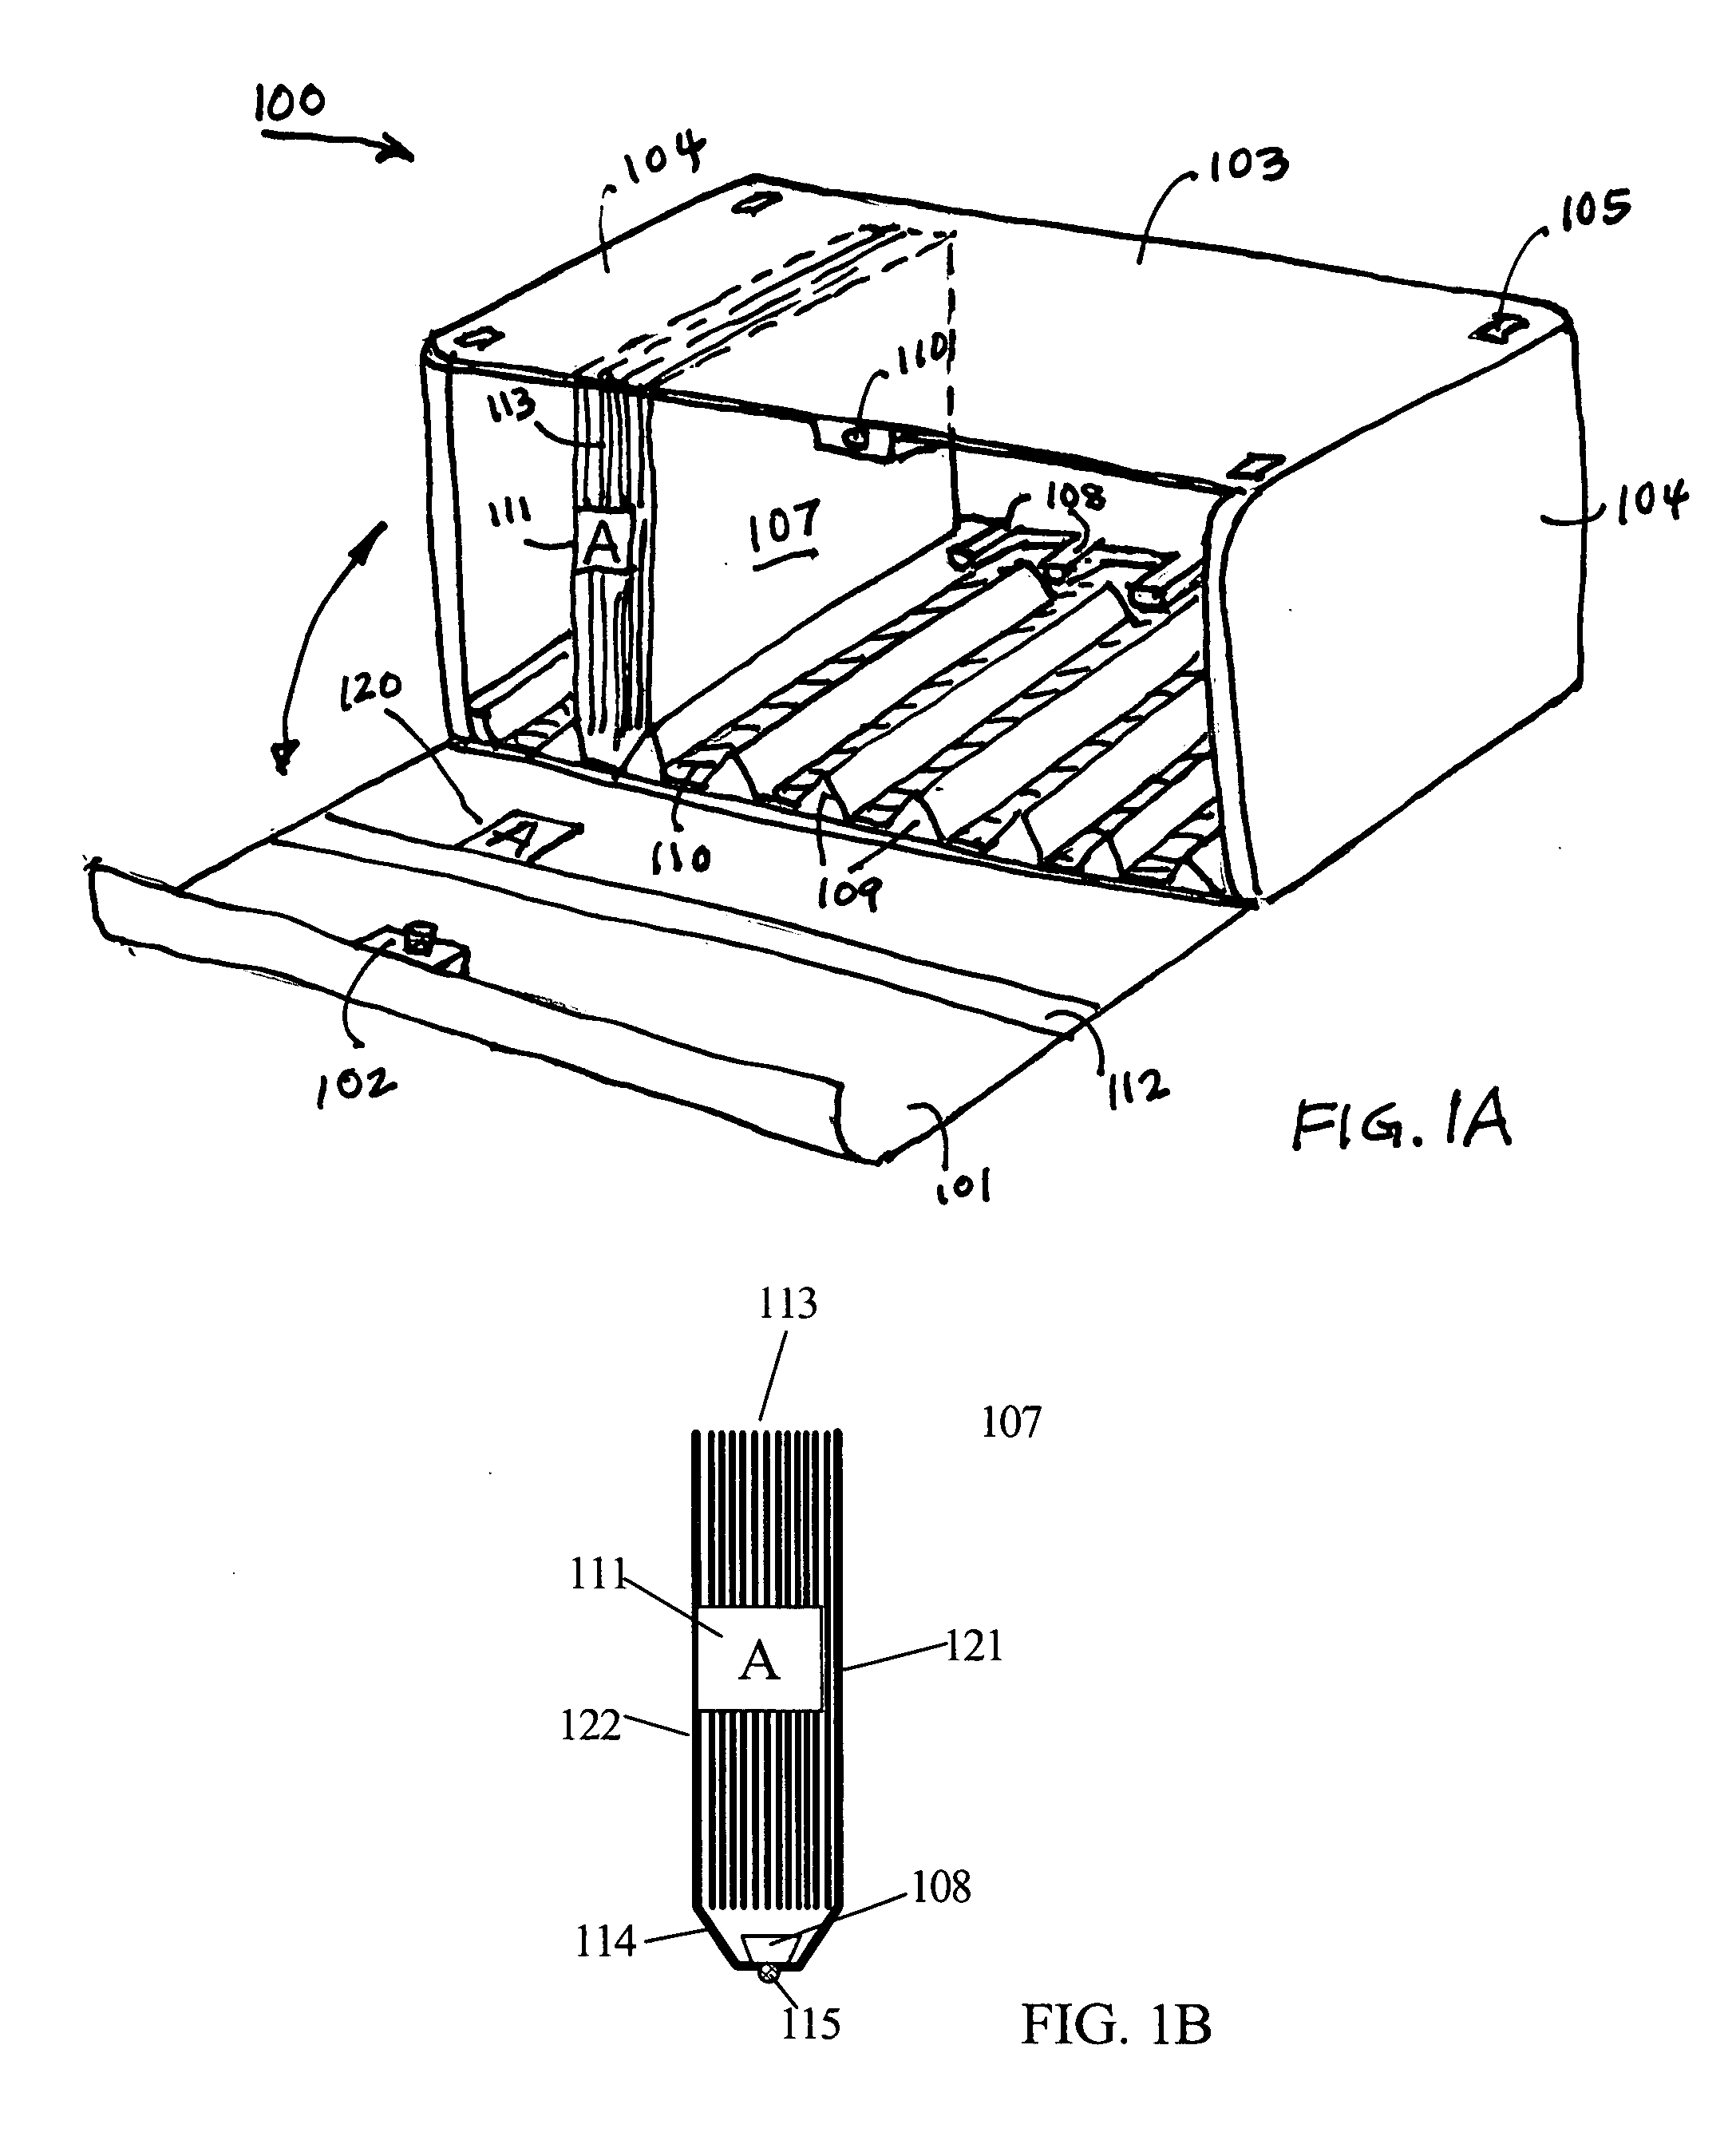 Storage system for storing, accessing and transporting planar media